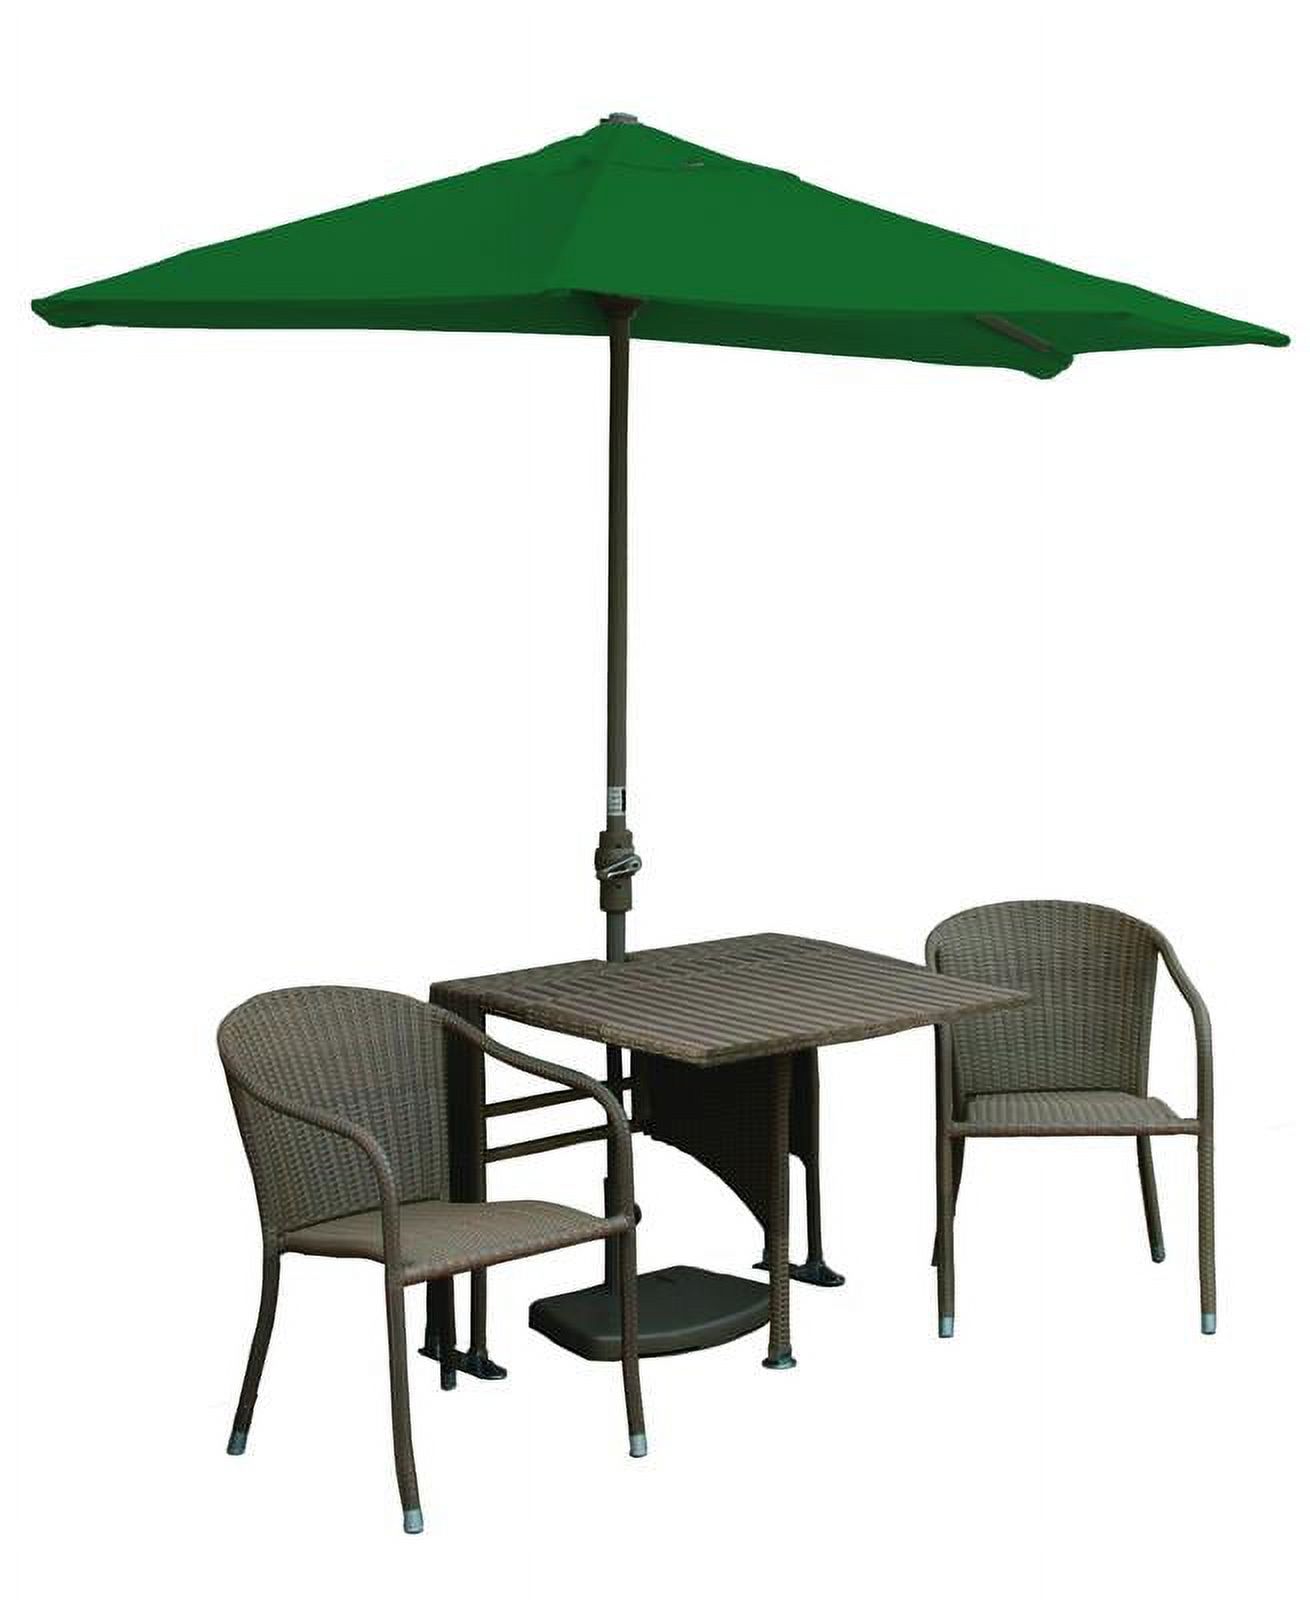 Blue Star Group Terrace Mates Daniella All-Weather Wicker Coffee Color Table Set w/ 7.5'-Wide OFF-THE-WALL BRELLA - Forest Green Sunbrella Canopy - image 1 of 11